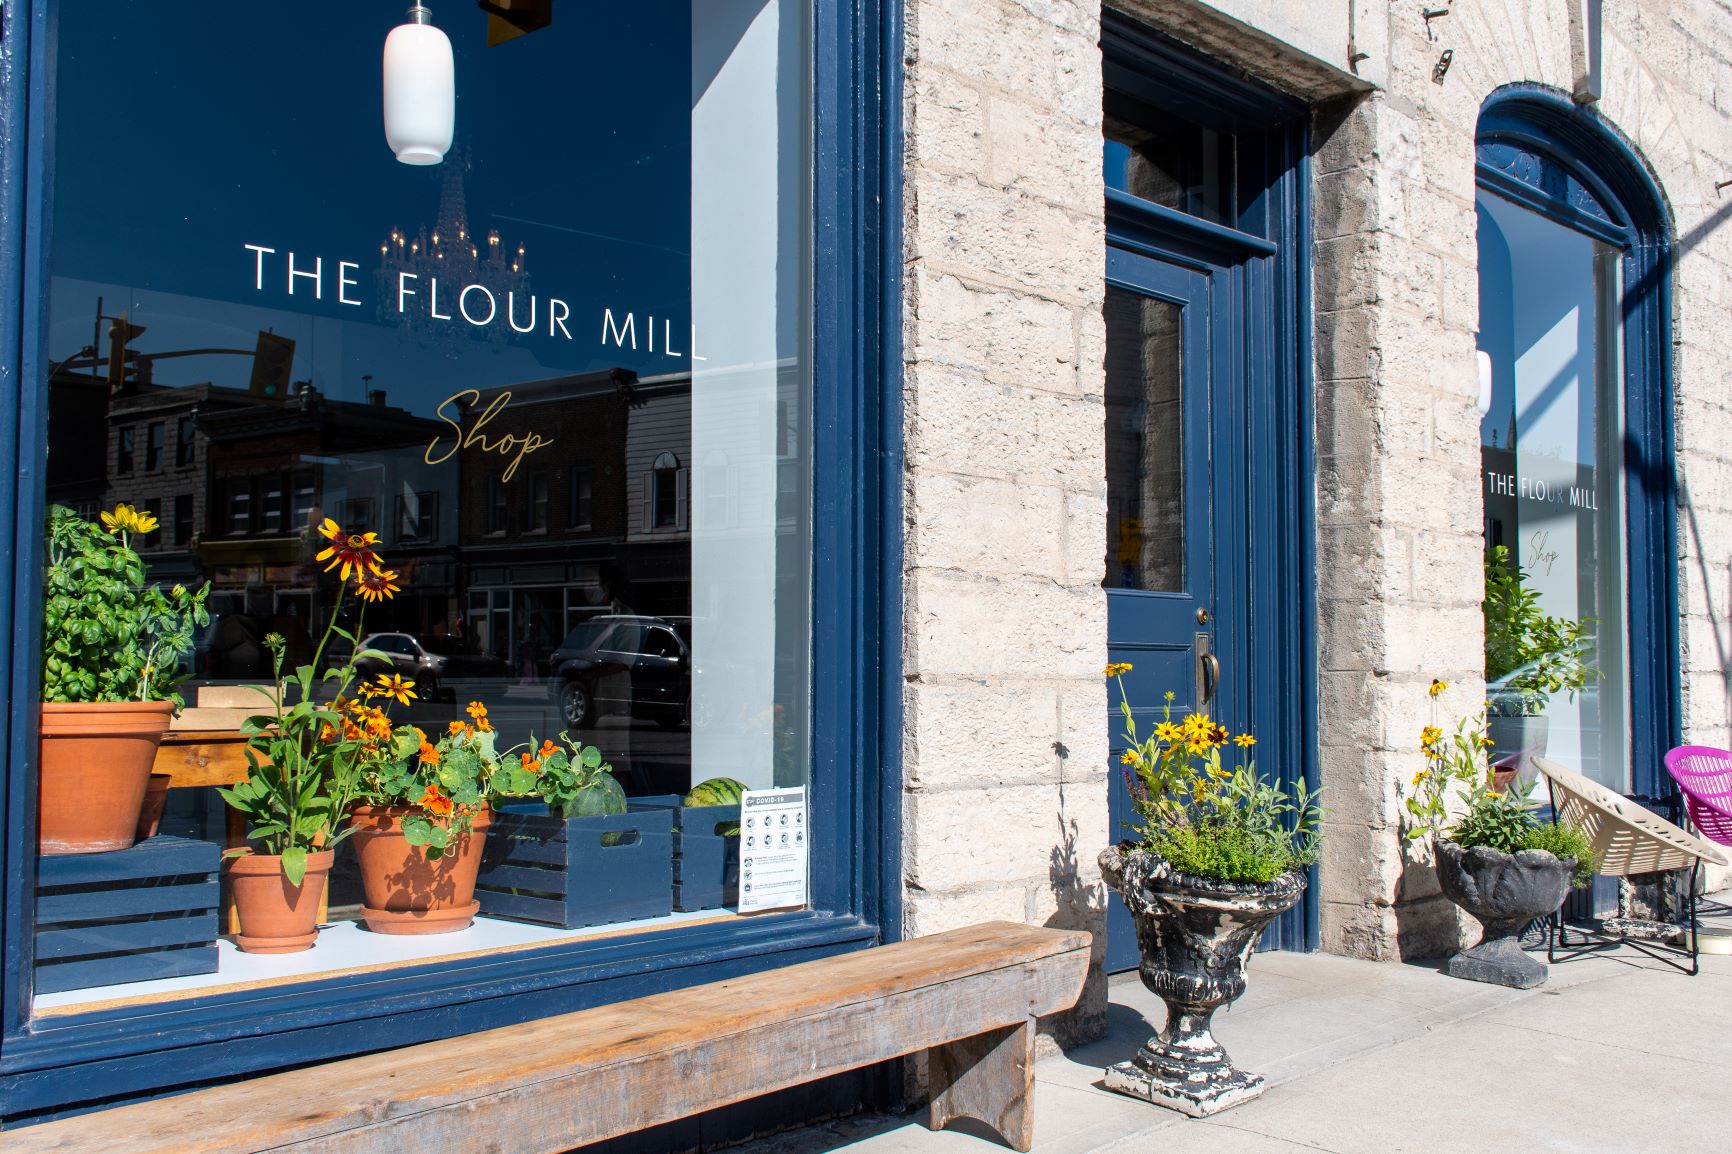 A walk through the historic streets of St. Marys, Ontario offers a first-hand look at the stunning limestone architecture and vibrant downtown core.